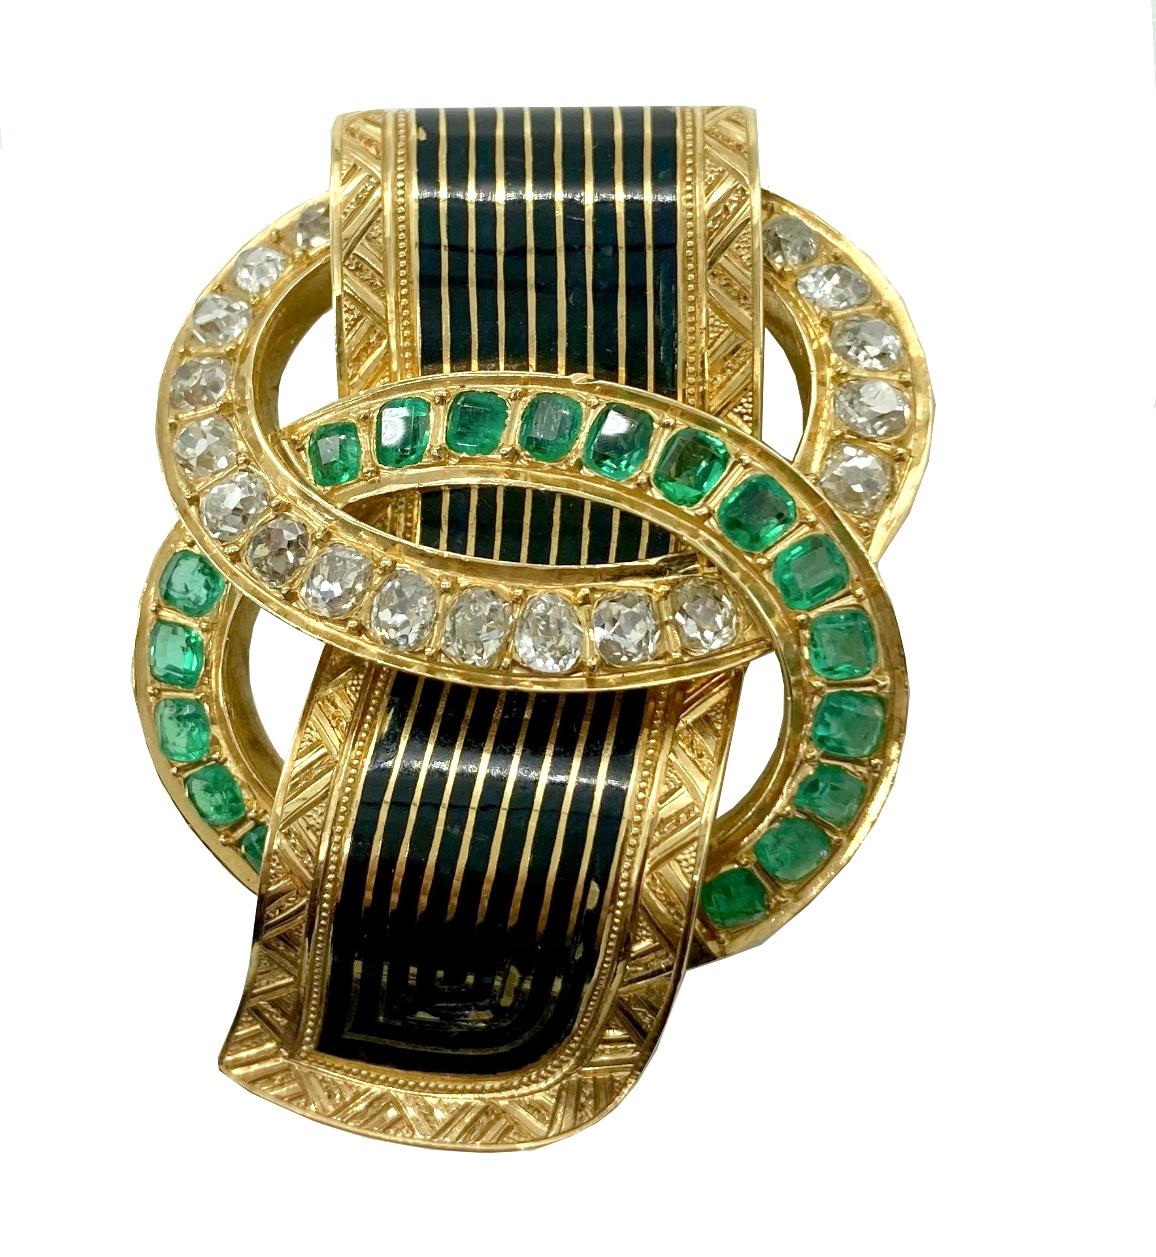 A superb taille d’epargne enamel, emerald, and diamond buckle brooch-pendant dating from nineteenth century France. Matching earrings and bracelet also available.